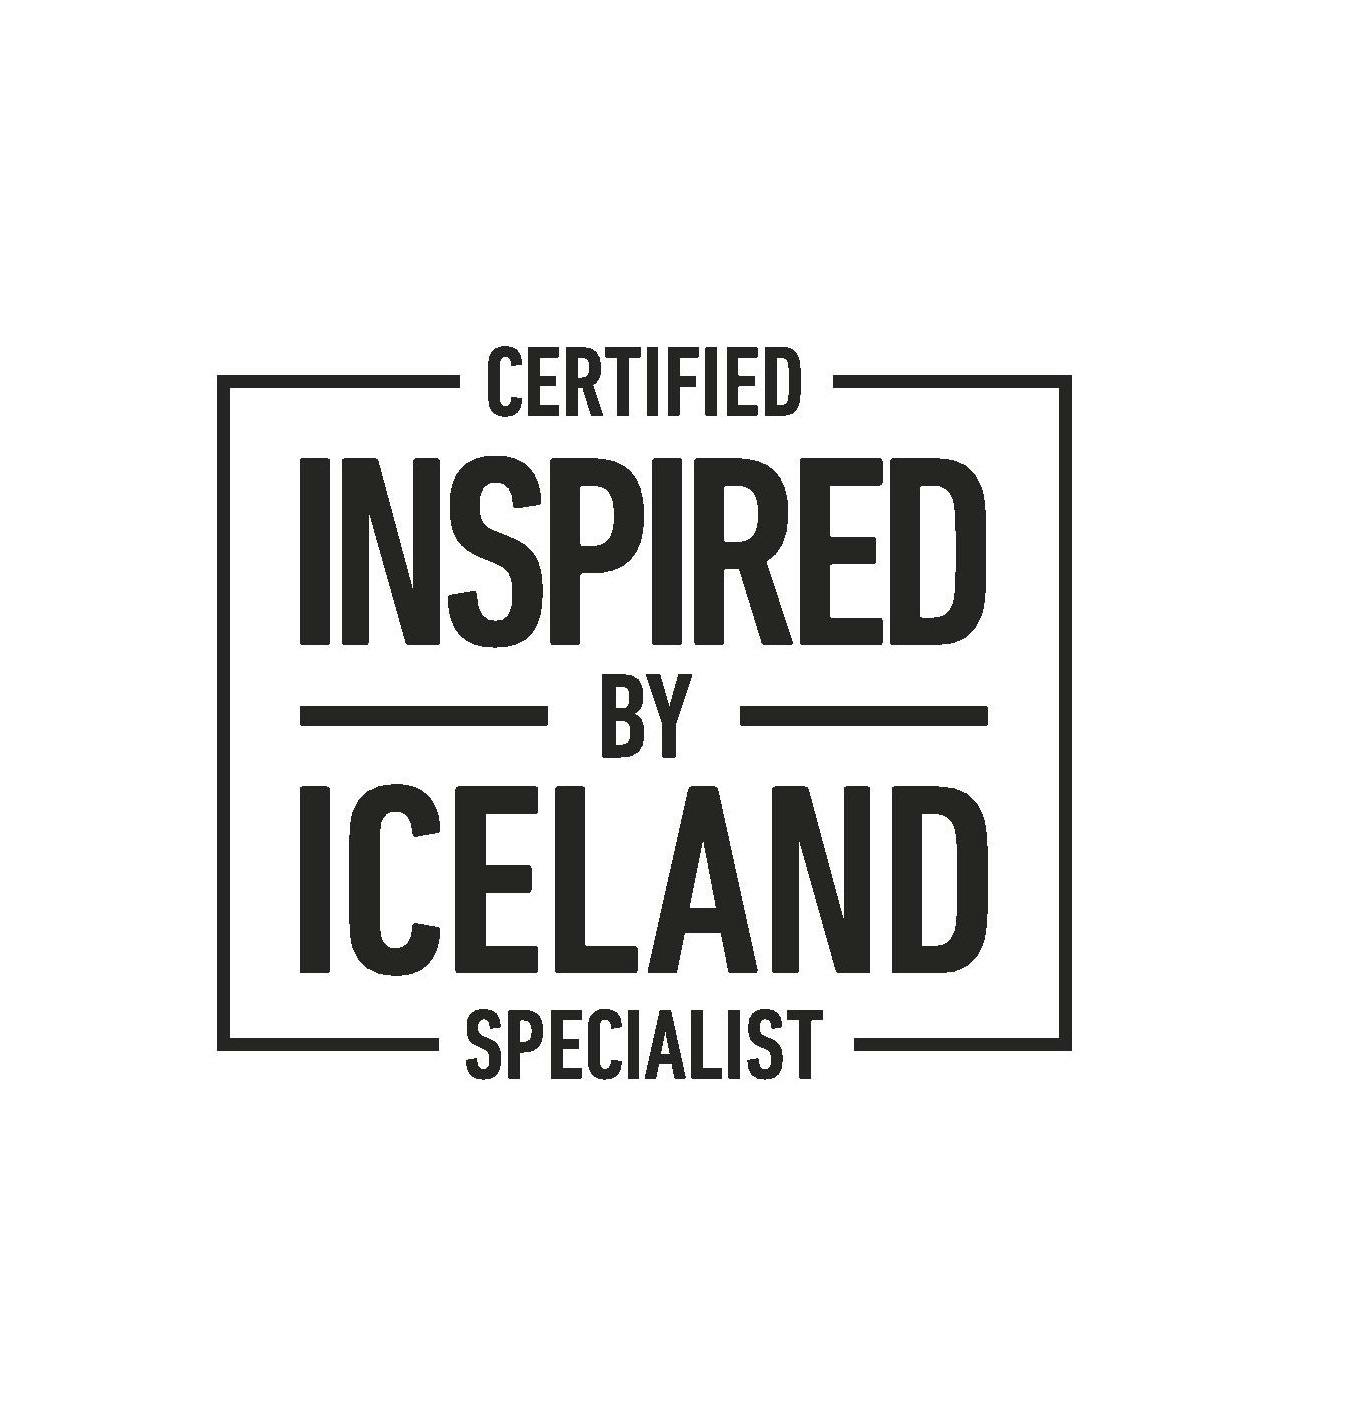 Certified Inspired by Iceland Specialist